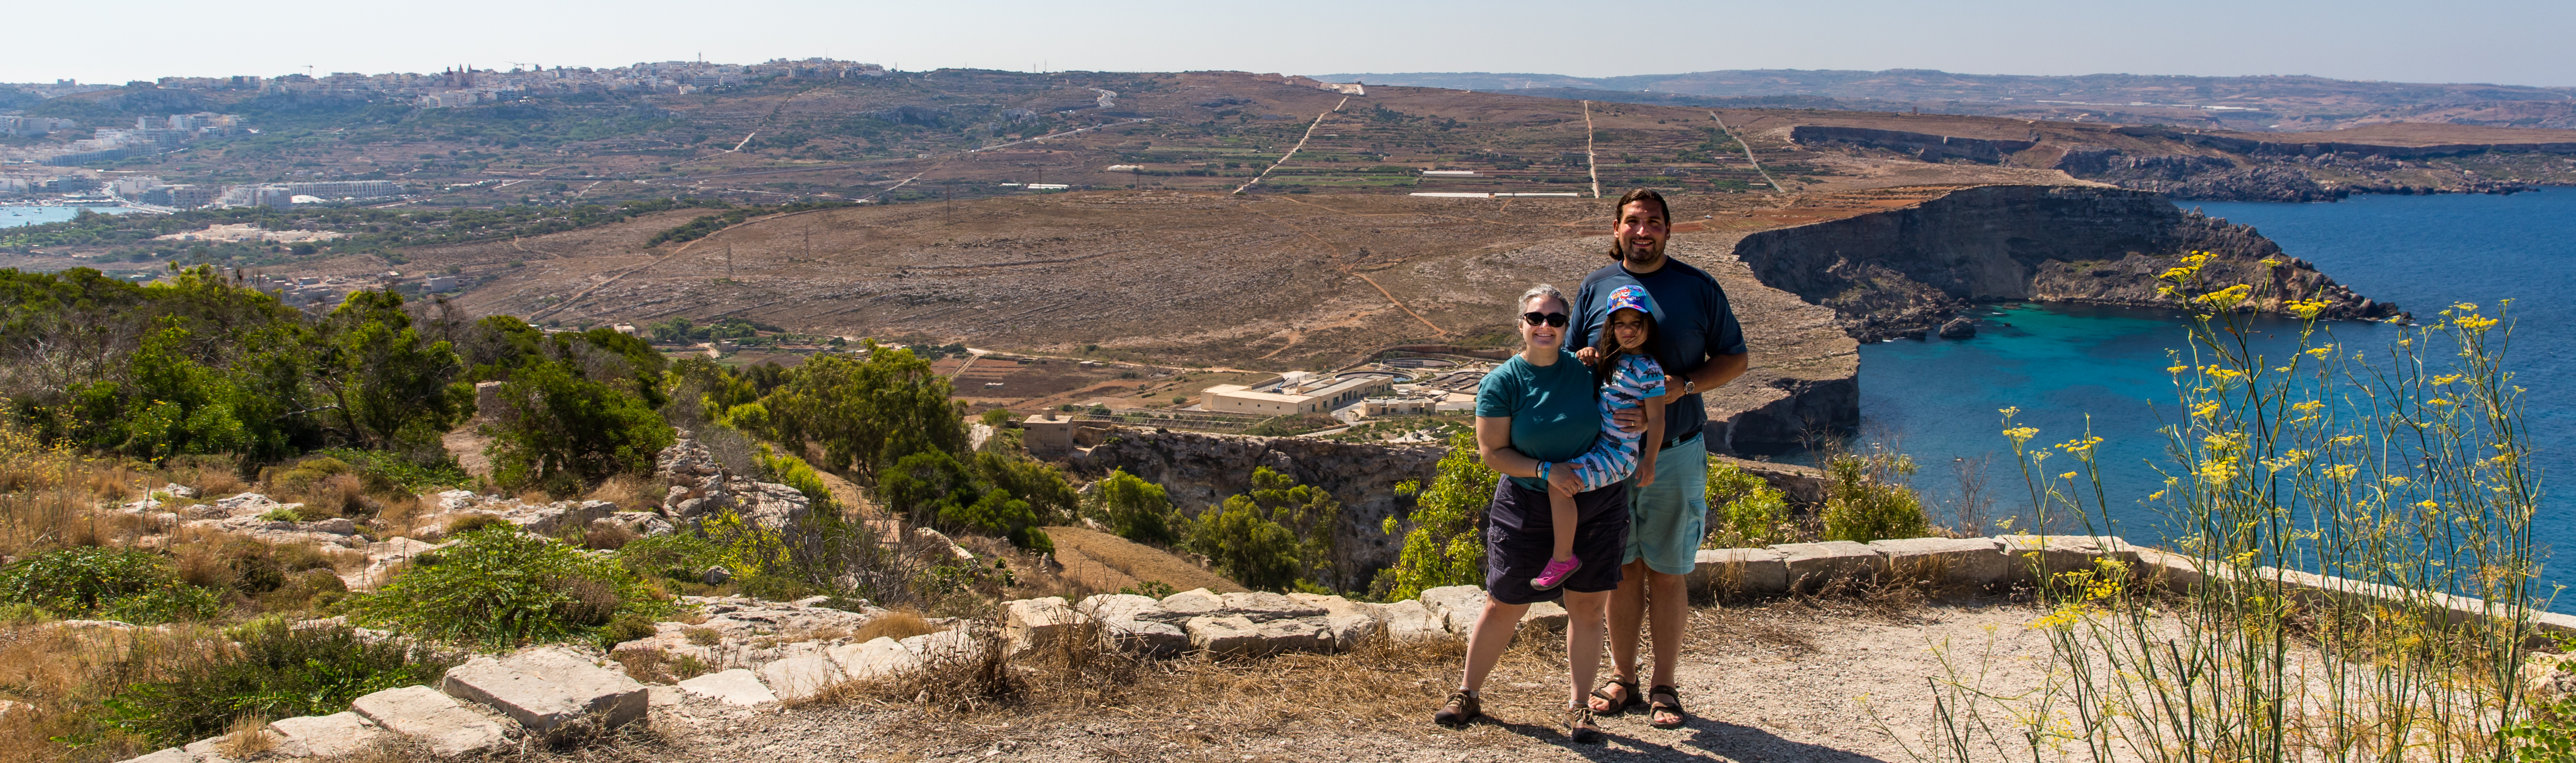 Aeryn joined for our second trip to Malta, marking our 15-year anniversary.